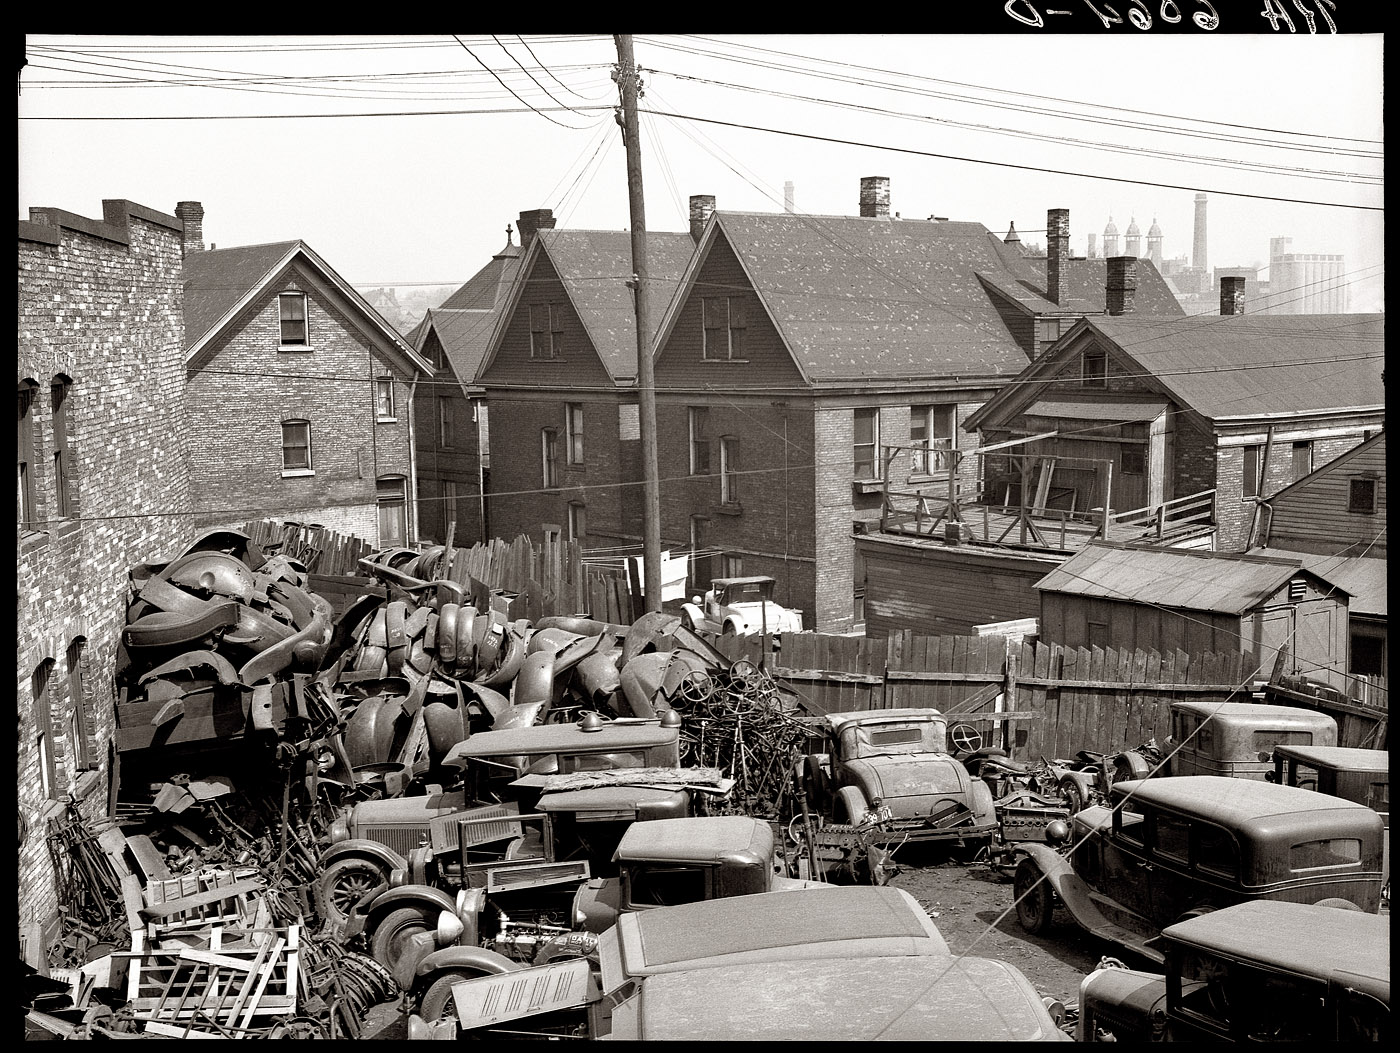 April 1936. "Junk, with living quarters close by." Milwaukee, Wisconsin. 3¼ x 4¼ nitrate negative photographed by Carl Mydans. View full size.